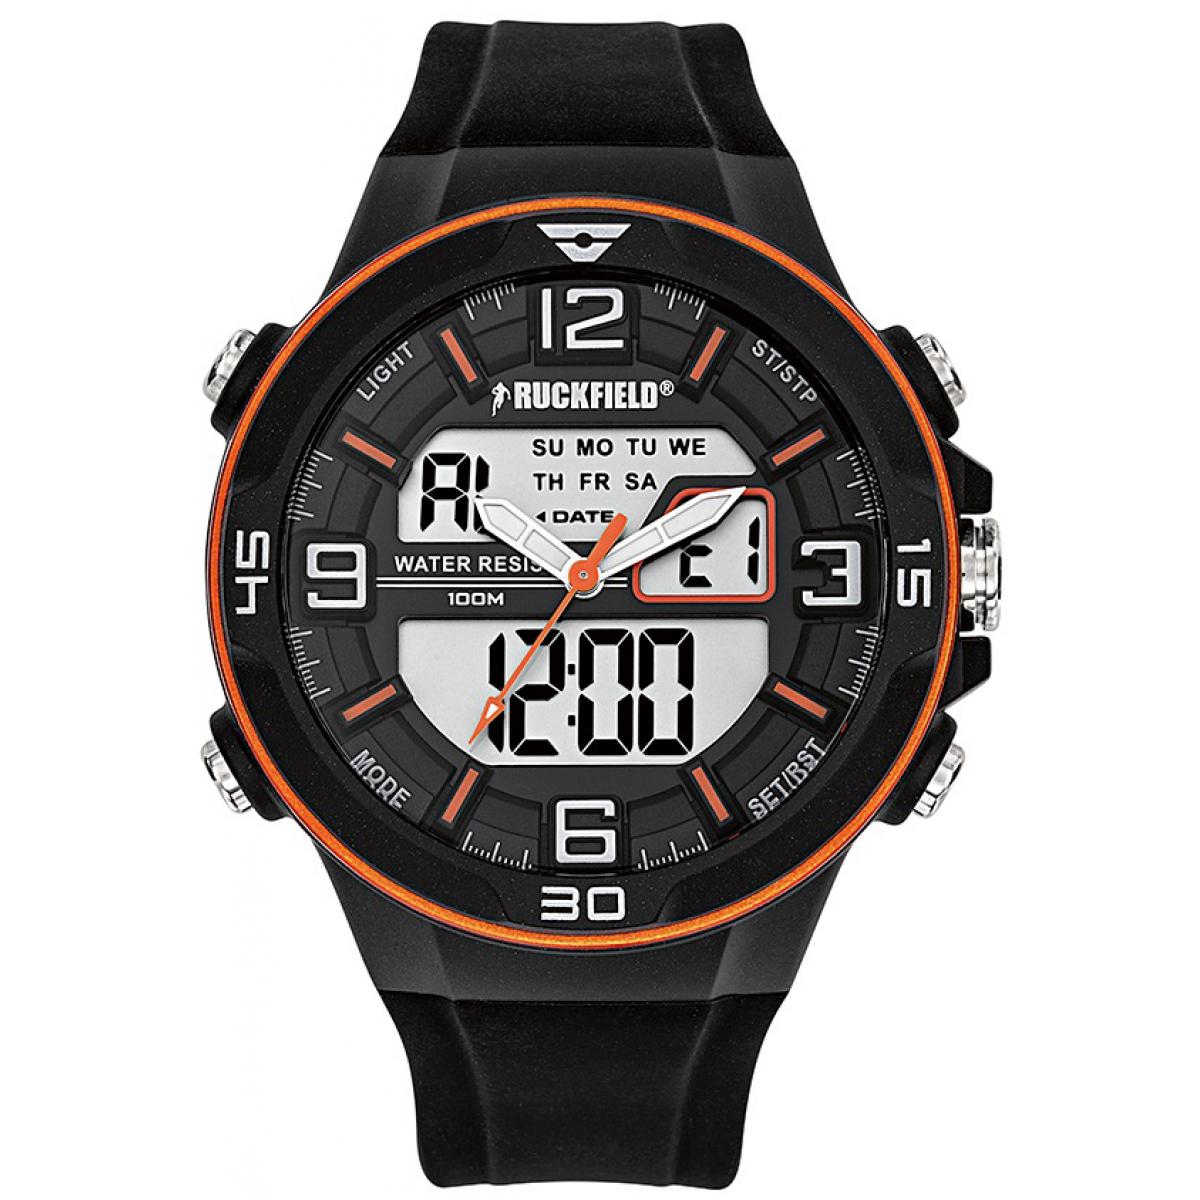 Montre Ruckfield 685060 - Multifonction Ana-digital Silicone Noir Homme